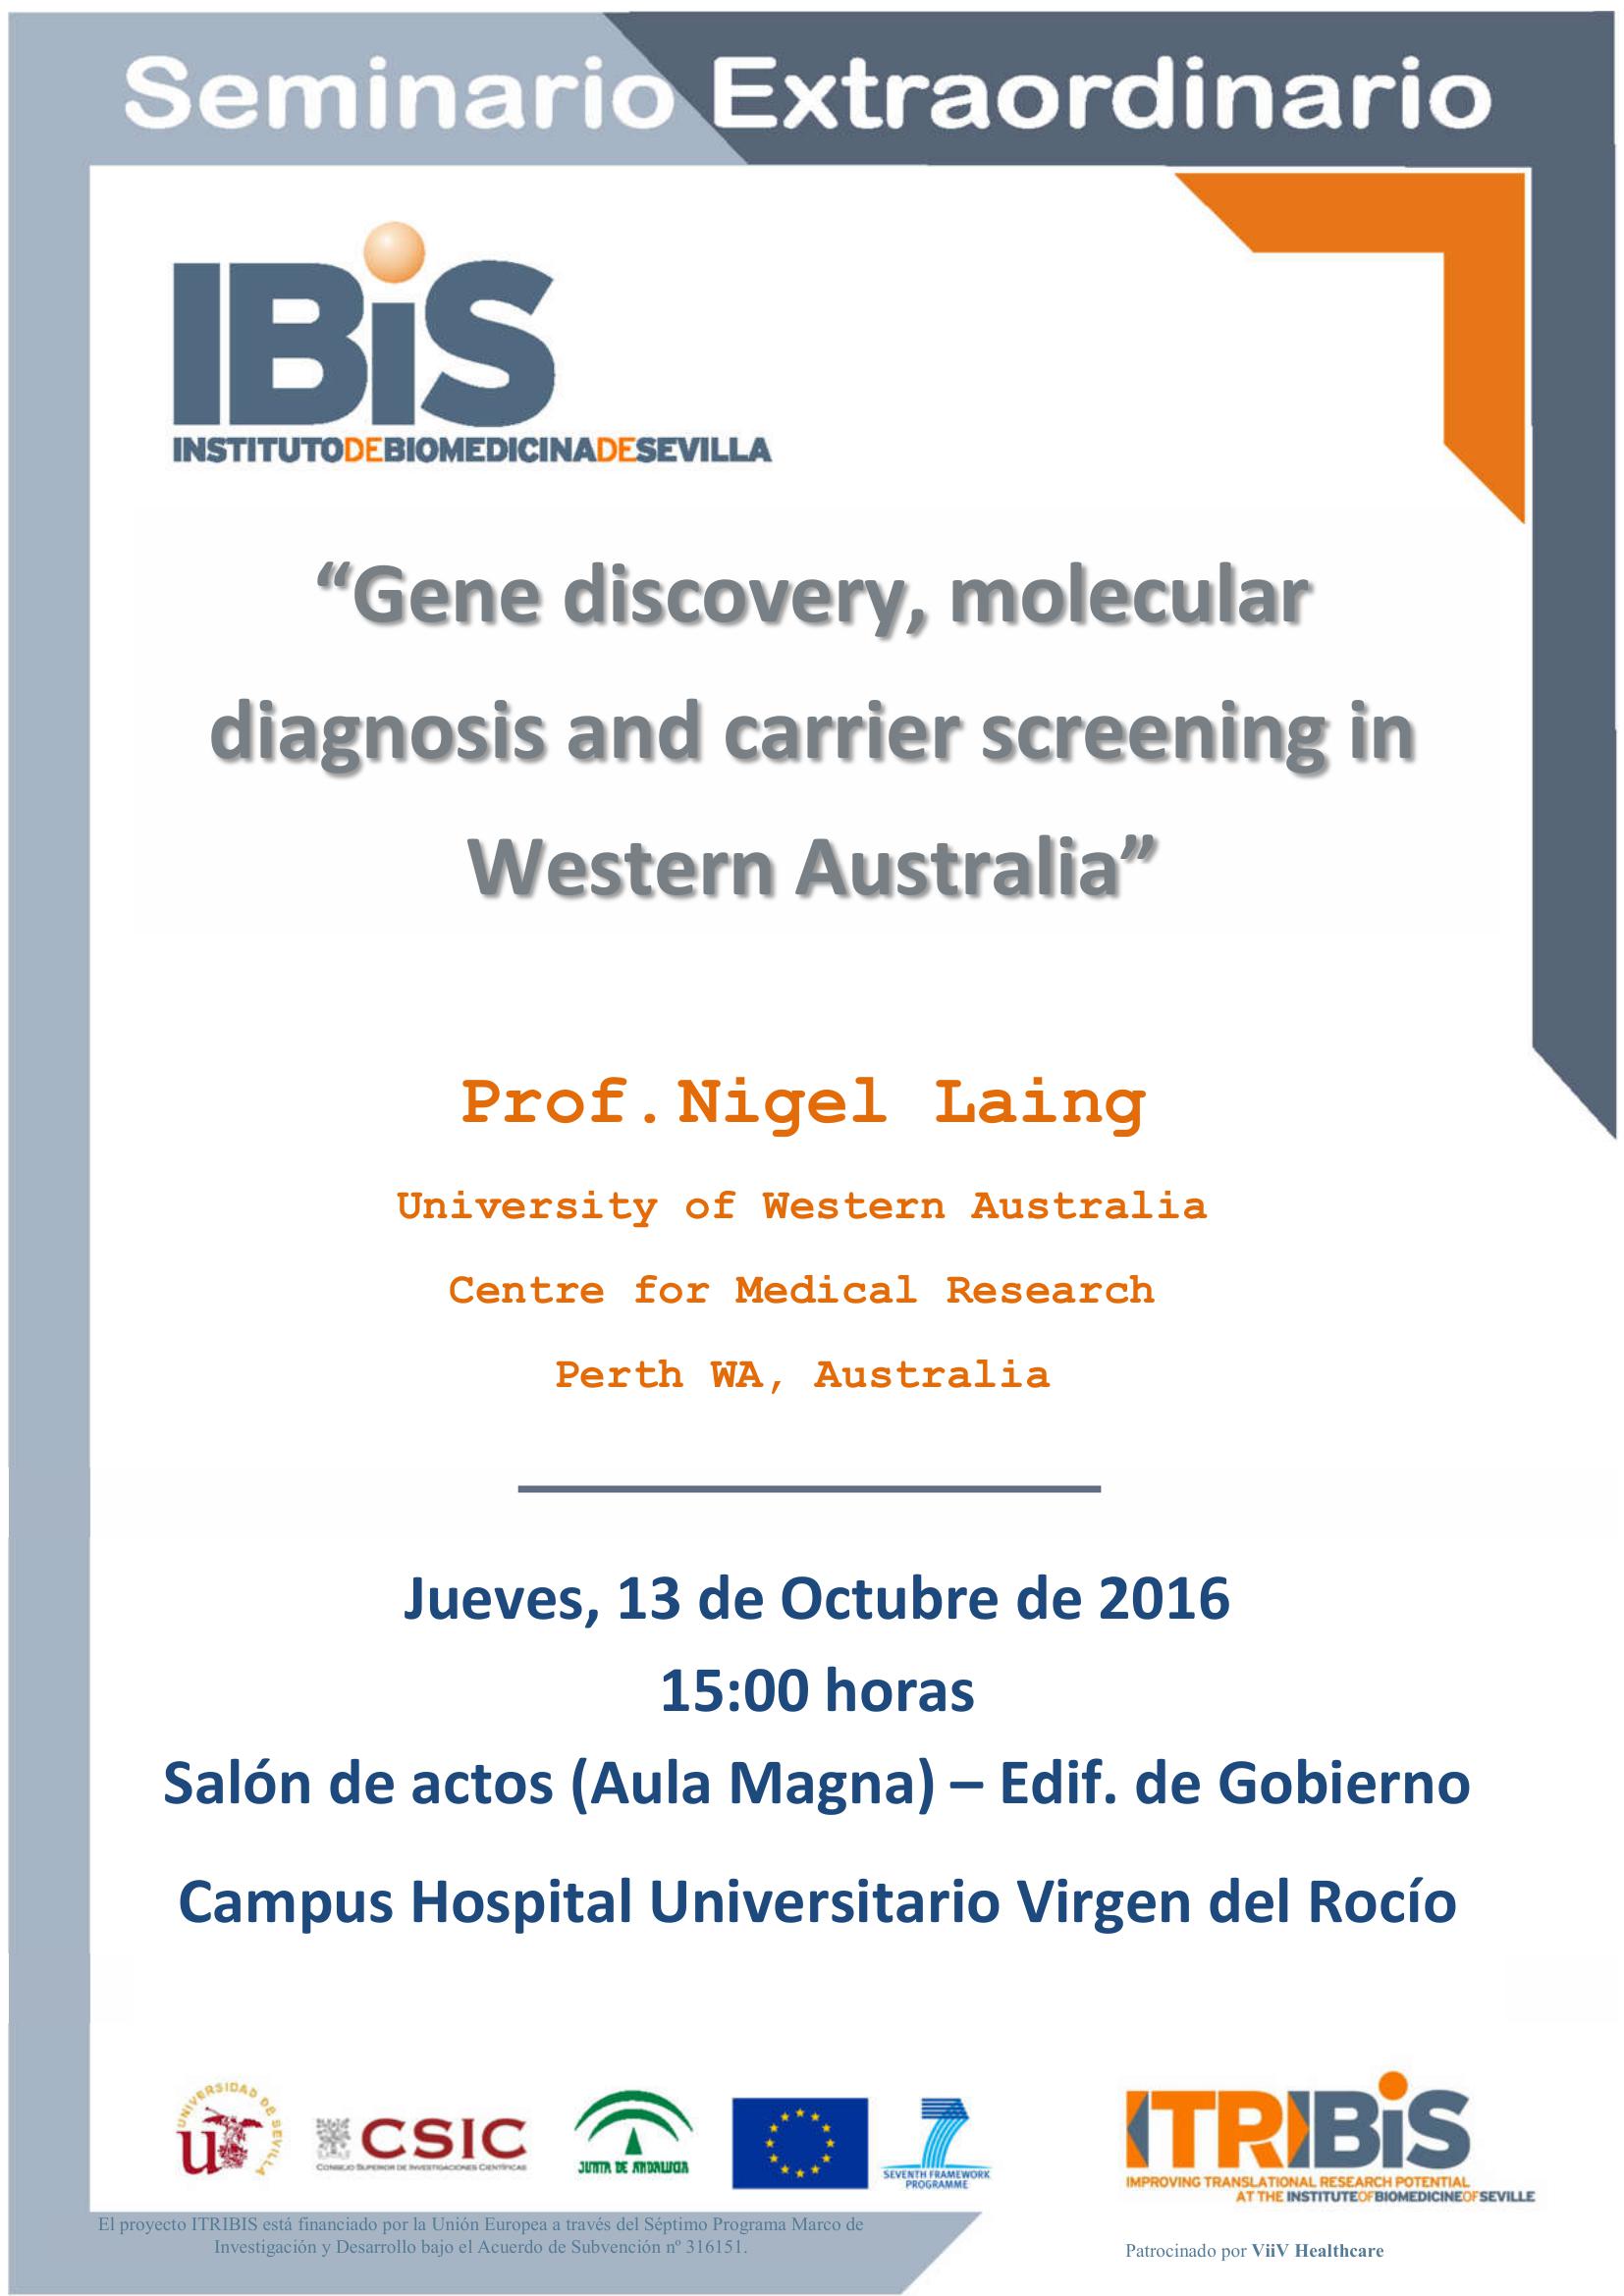 Poster: Gene discovery, molecular diagnosis and carrier screening in Western Australia